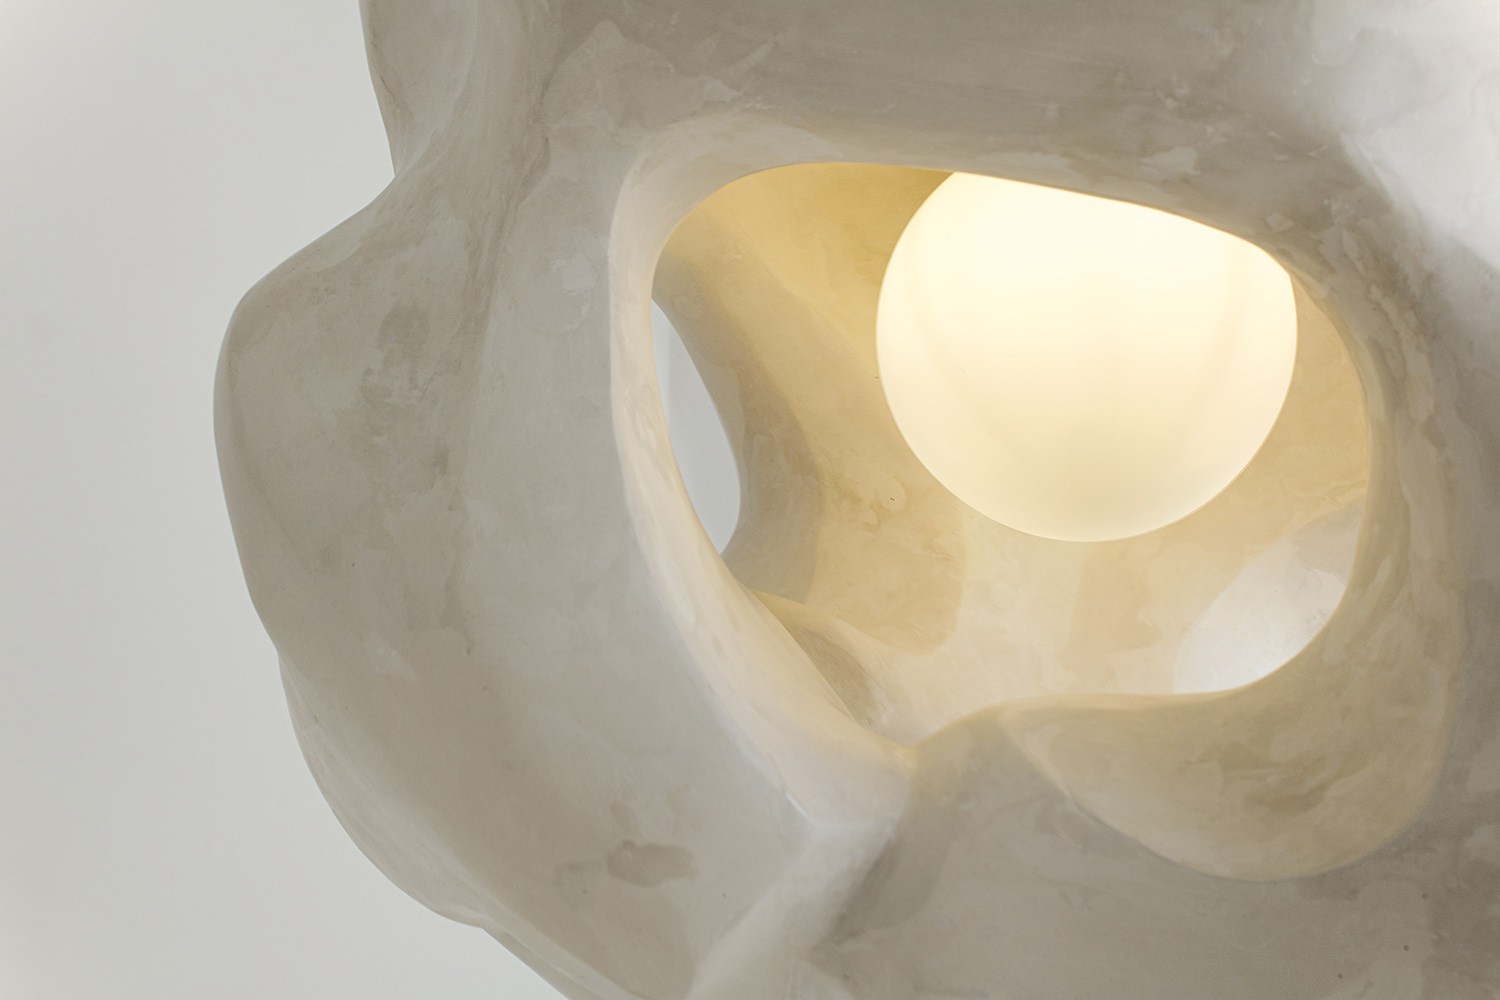 The light source cocooned within the gypsum body